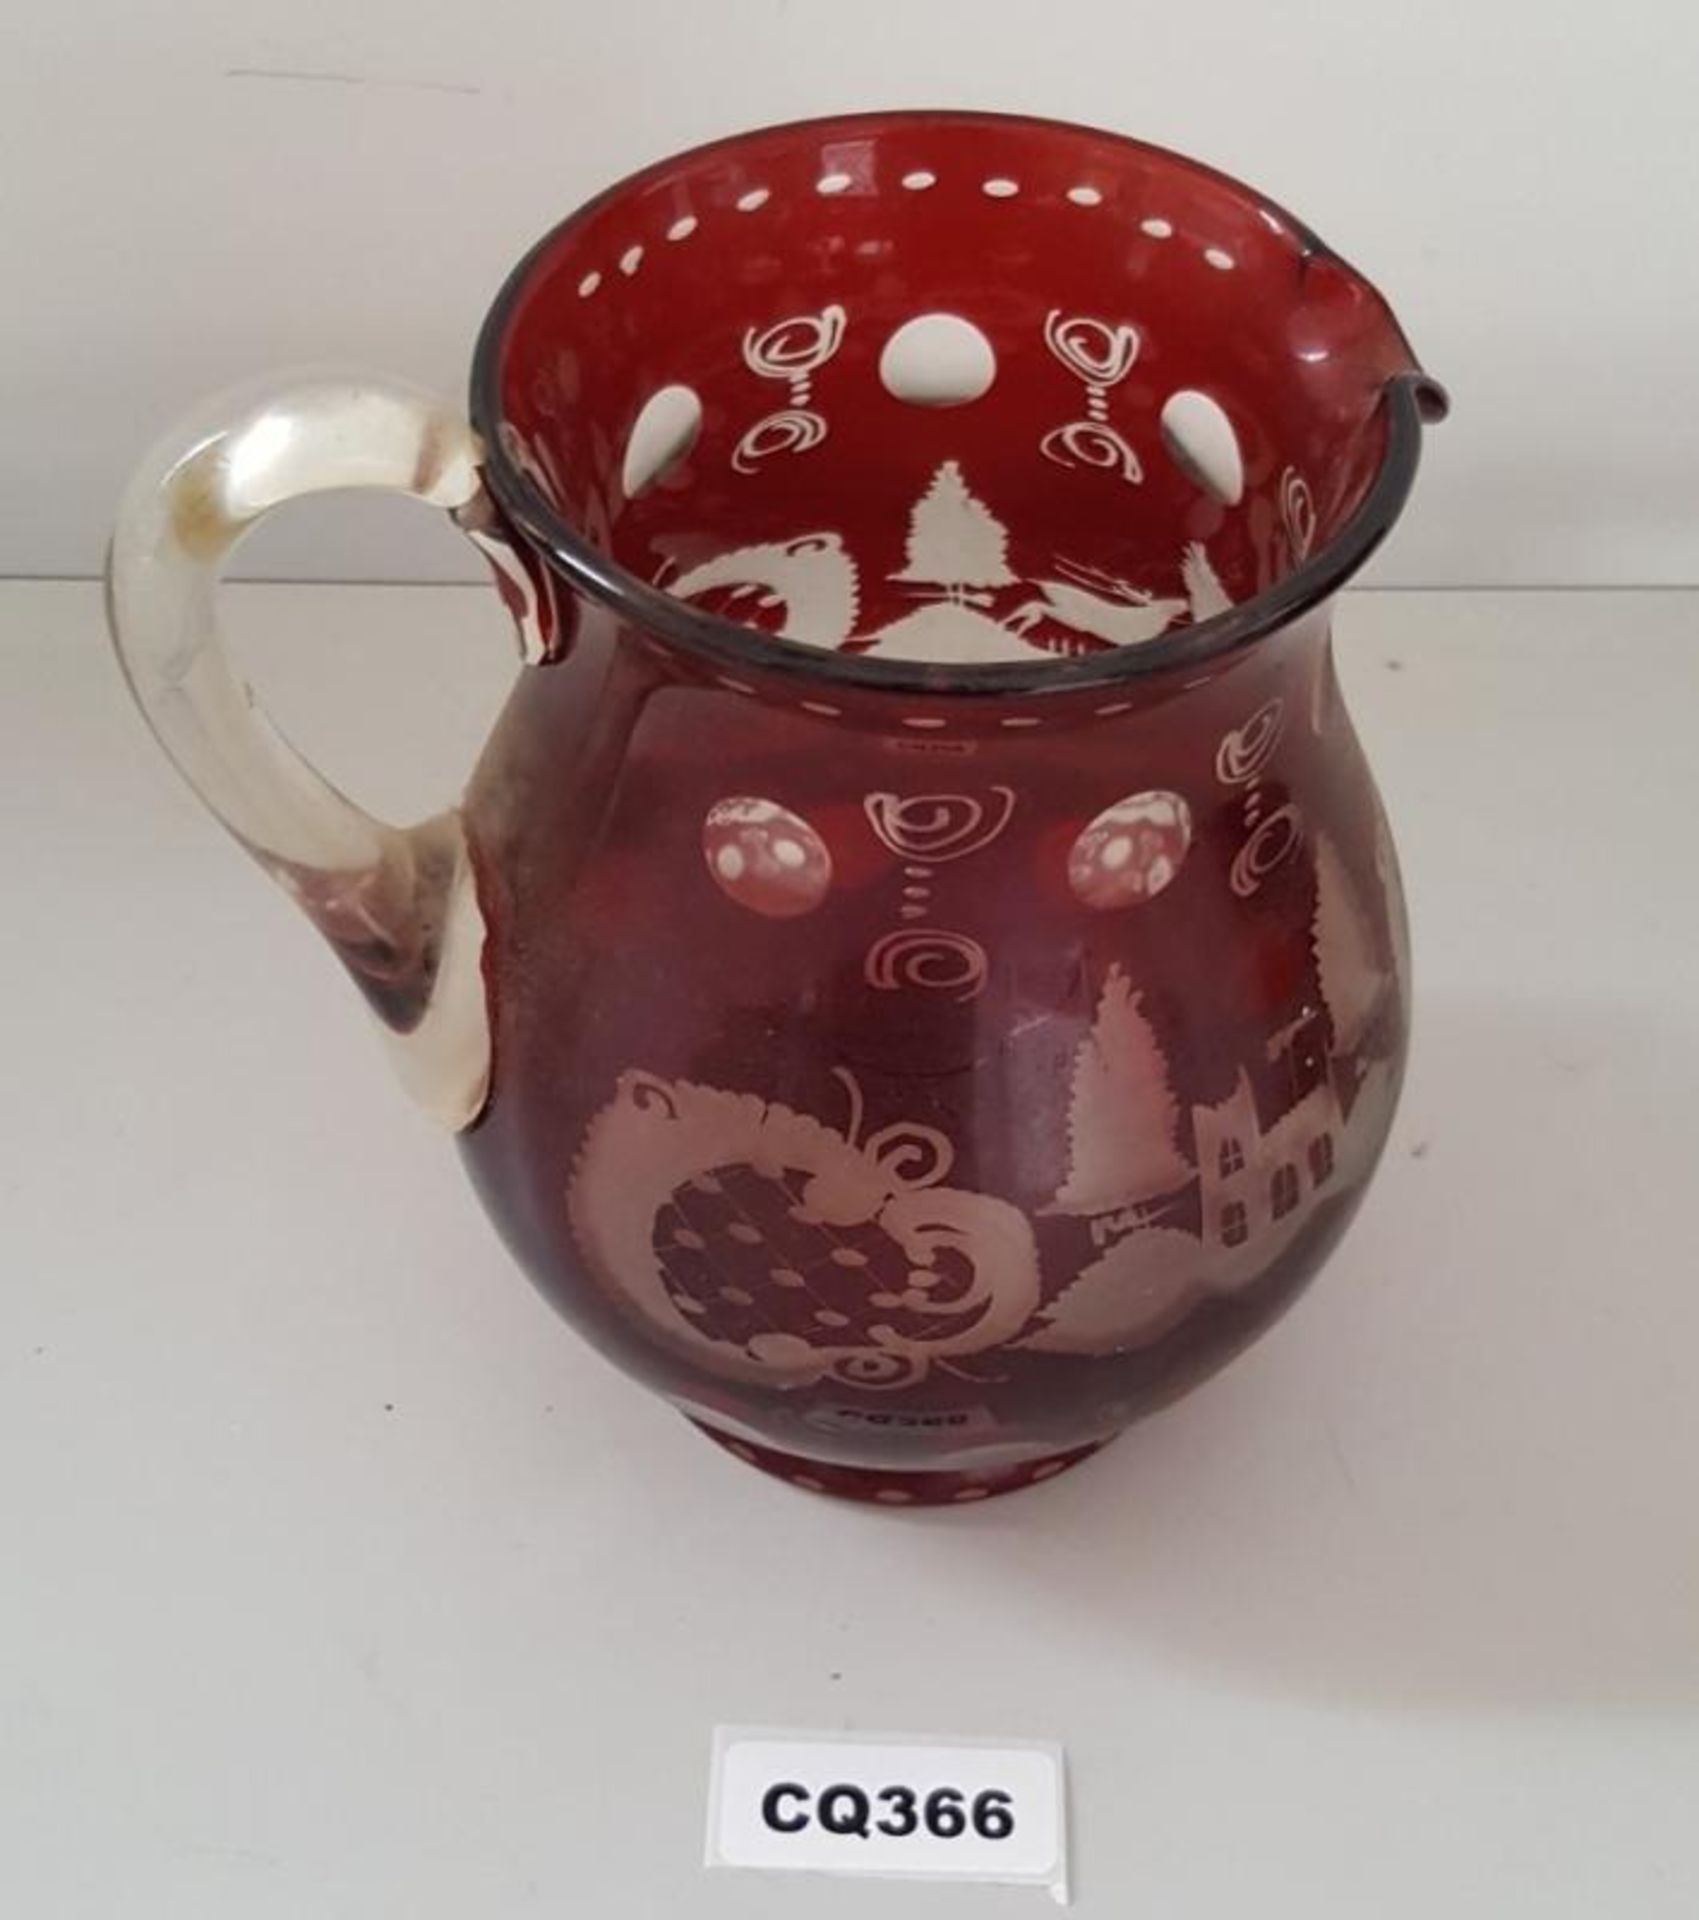 1 x Egermann Antique Glass Pitcher In Ruby Red With Clear Handle - Ref CQ366 E - Dimensions: H19/L17 - Image 4 of 4